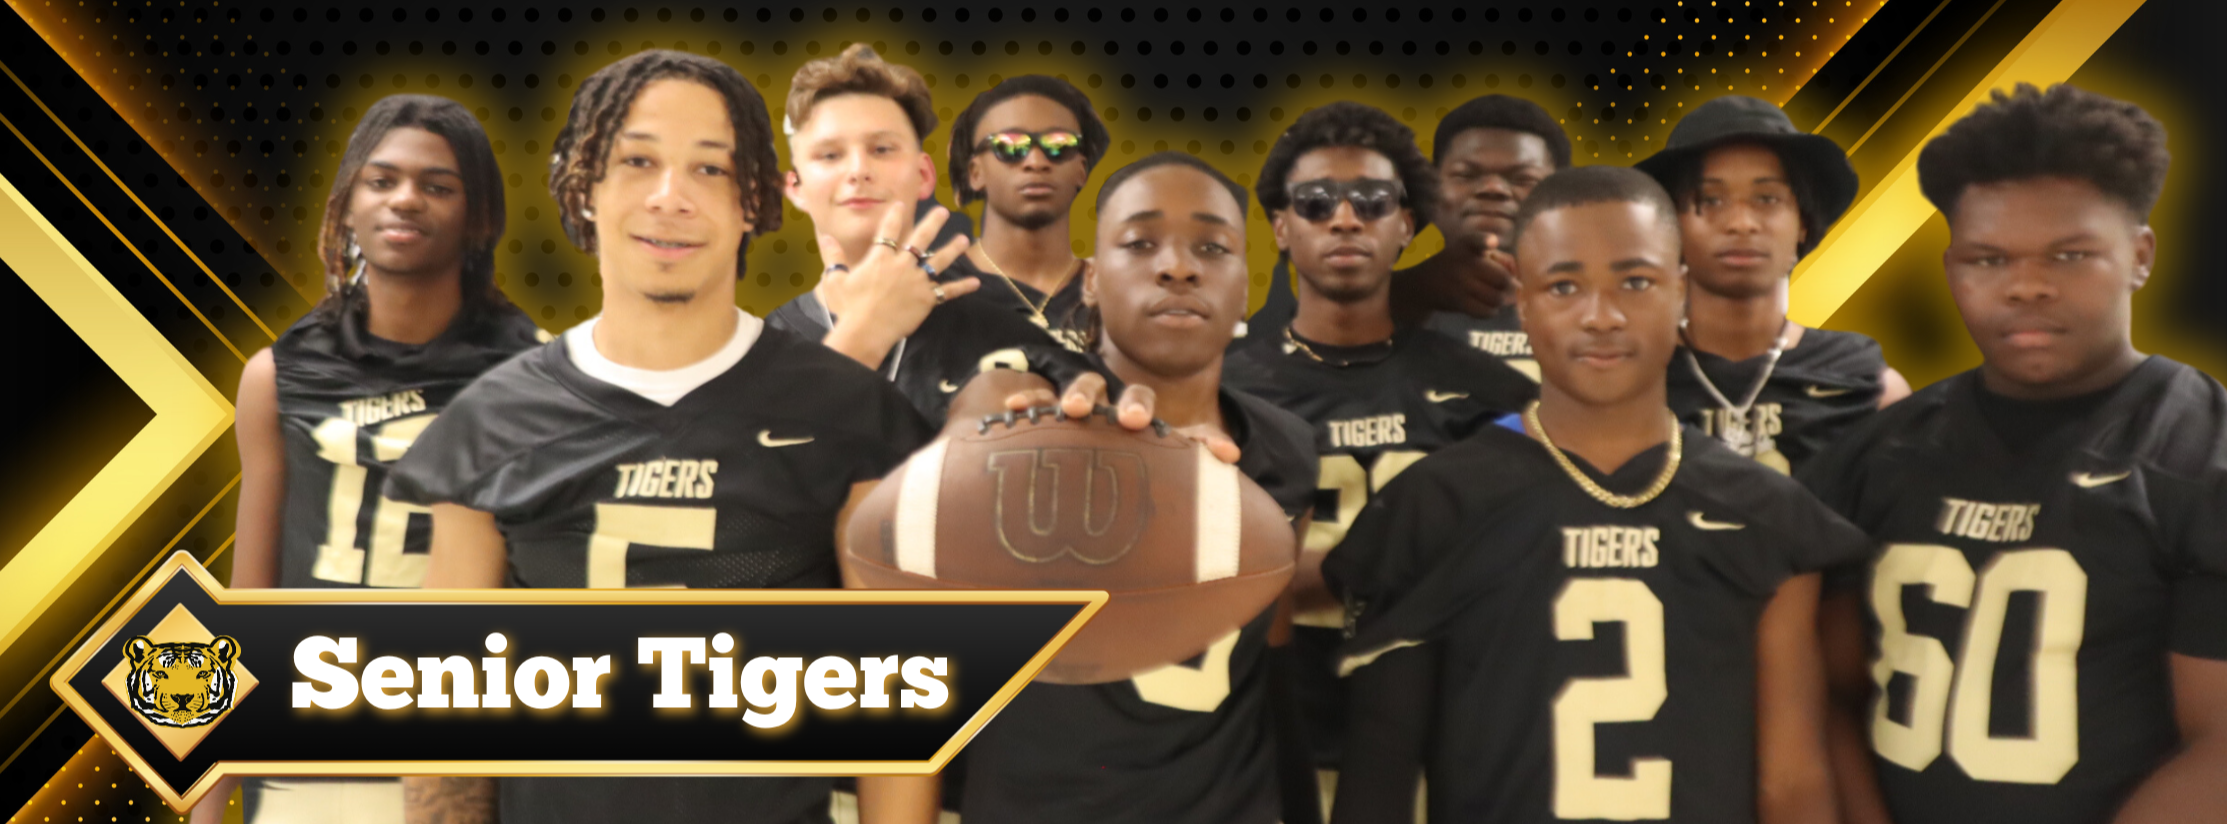 Senior tigers, photo of all of the senior football players